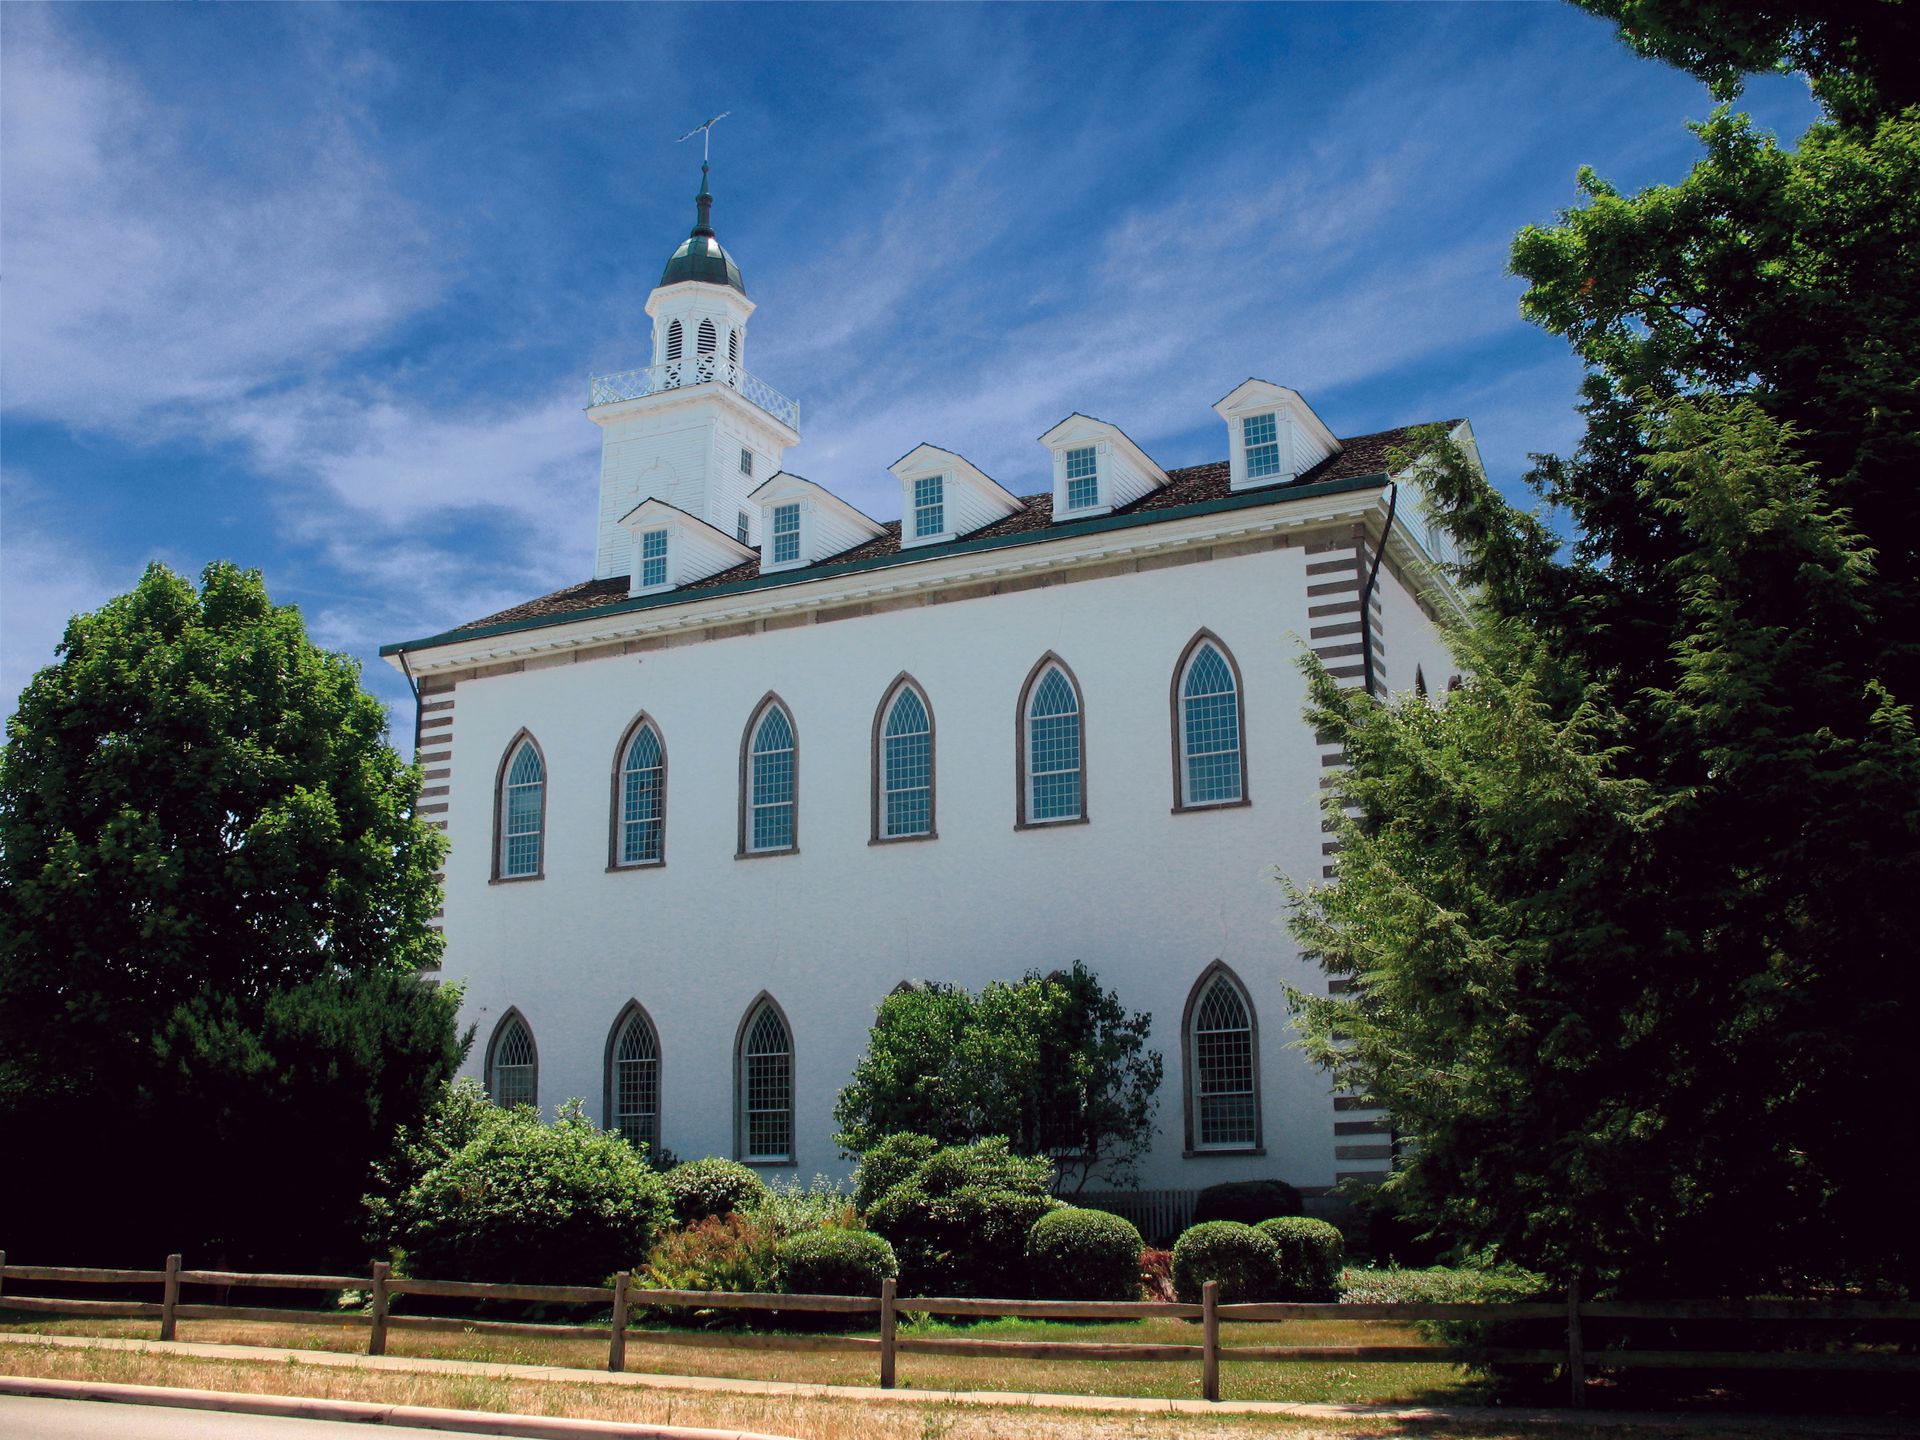 A side view of the exterior of the Kirtland Temple.